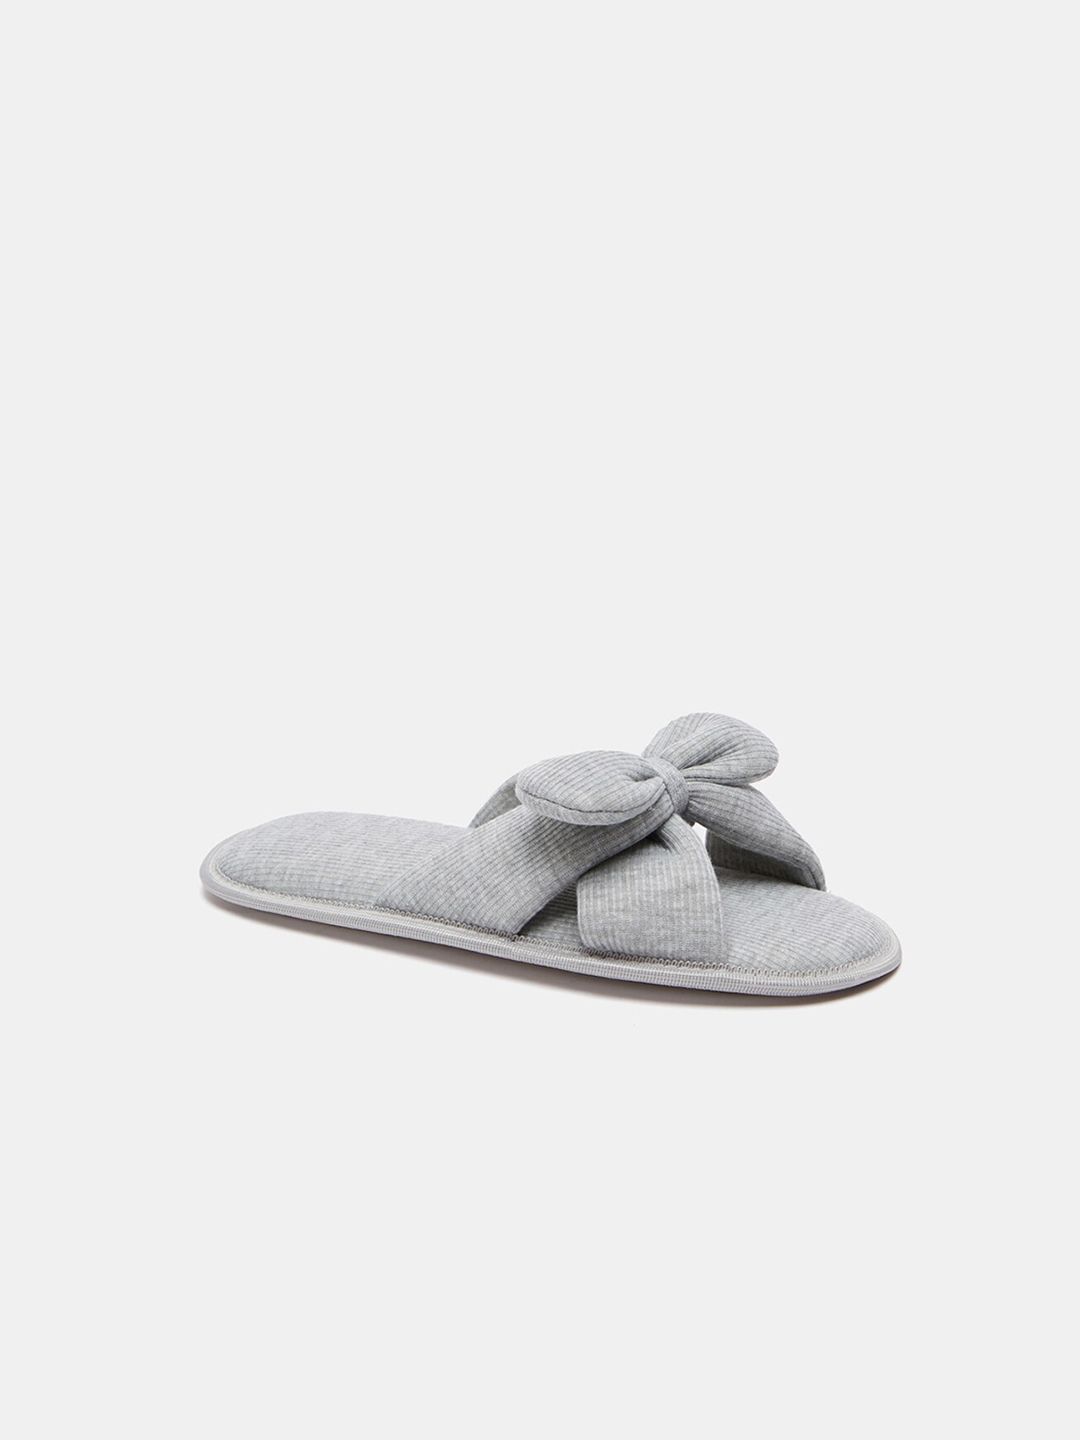 shoexpress Women Grey Room Slippers with Bow Price in India